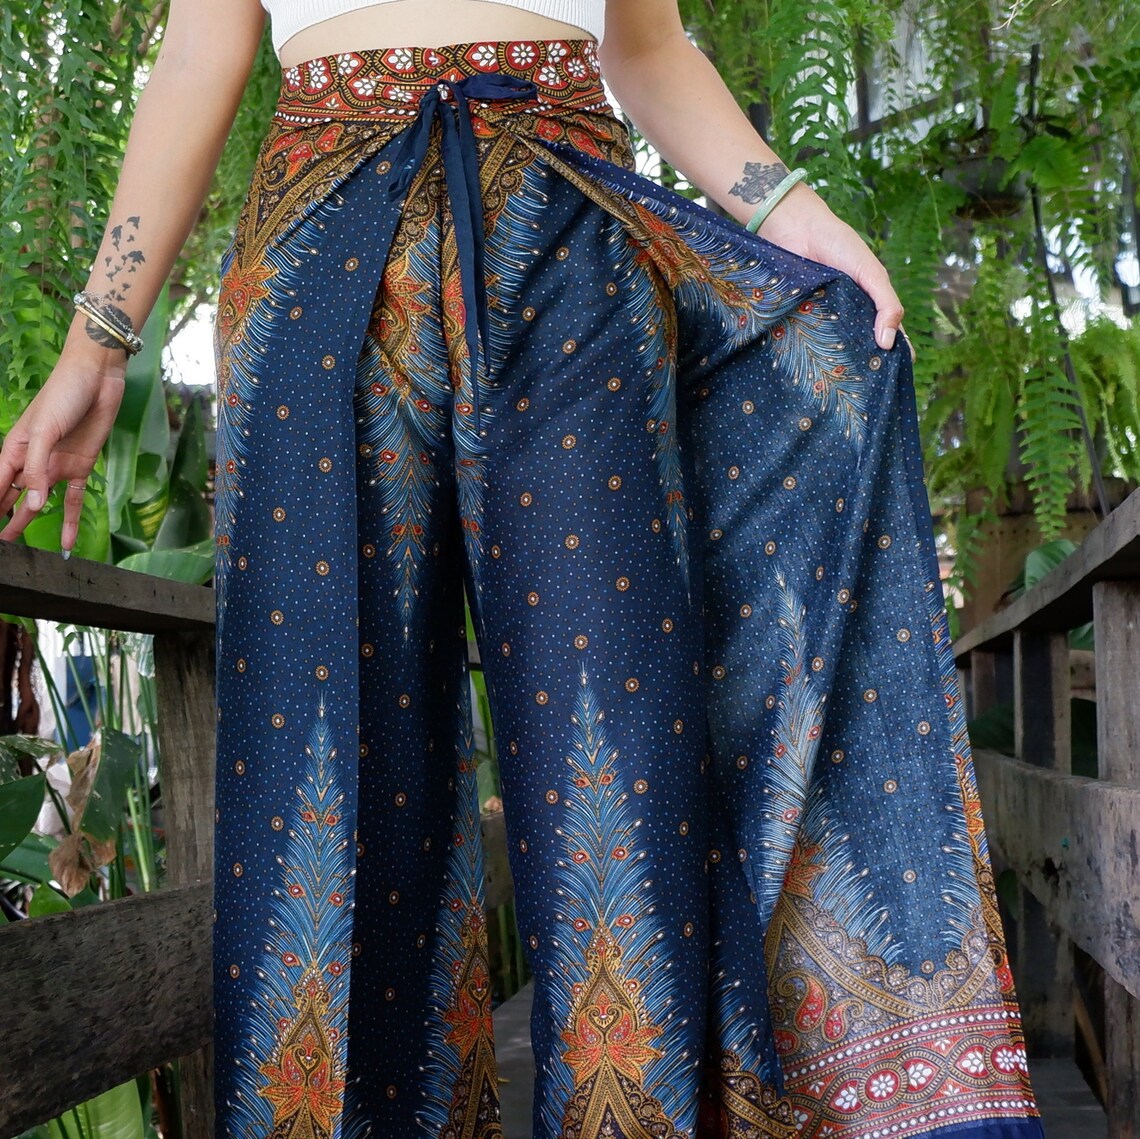 Elegant boho feather print wrap pants in a natural outdoor setting.